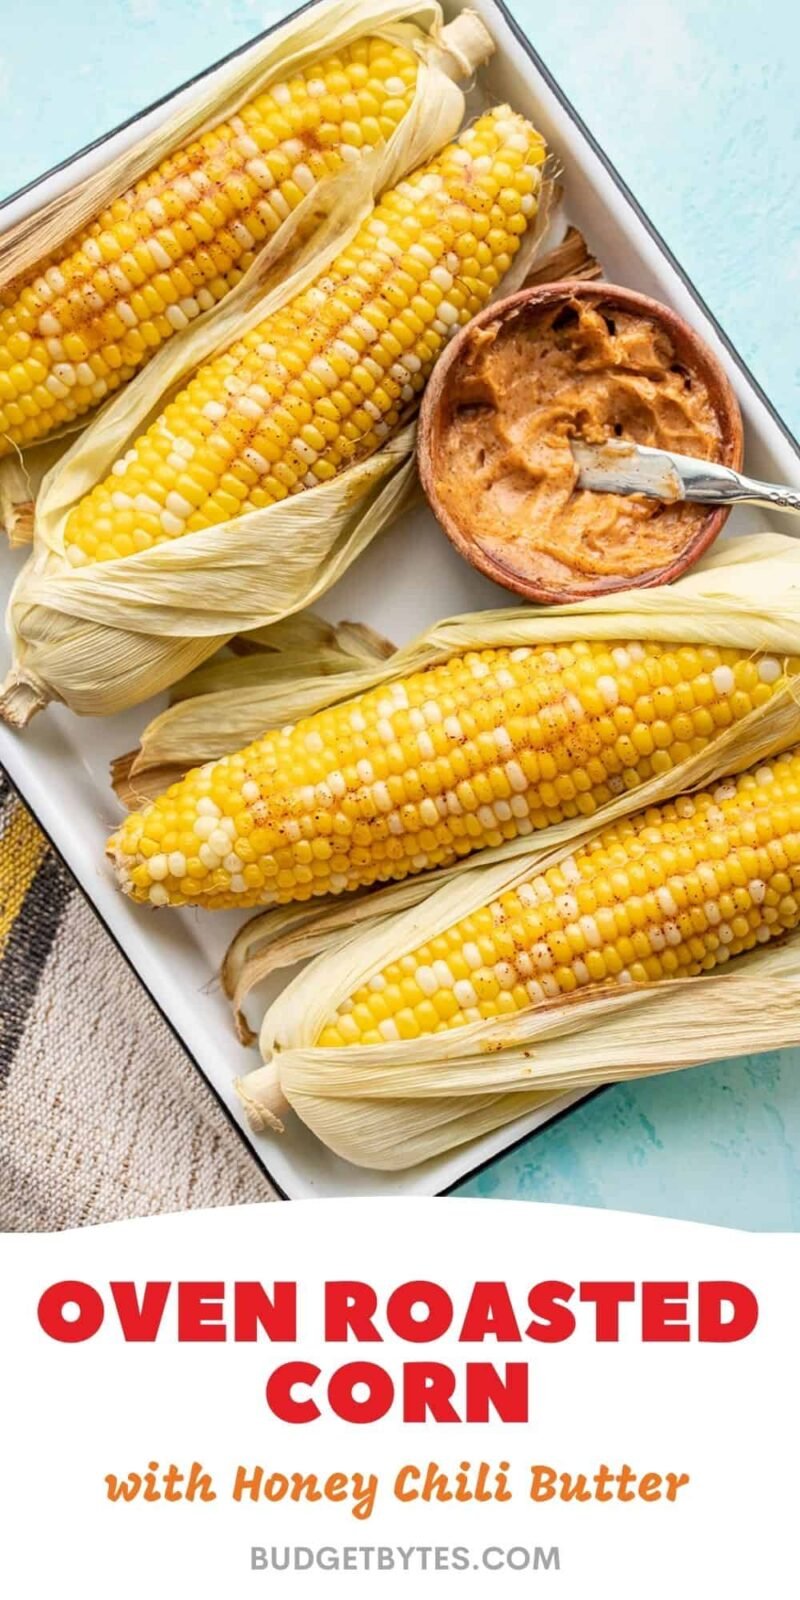 Oven Roasted Corn on a tray with a bowl of honey chili butter, title text at the bottom